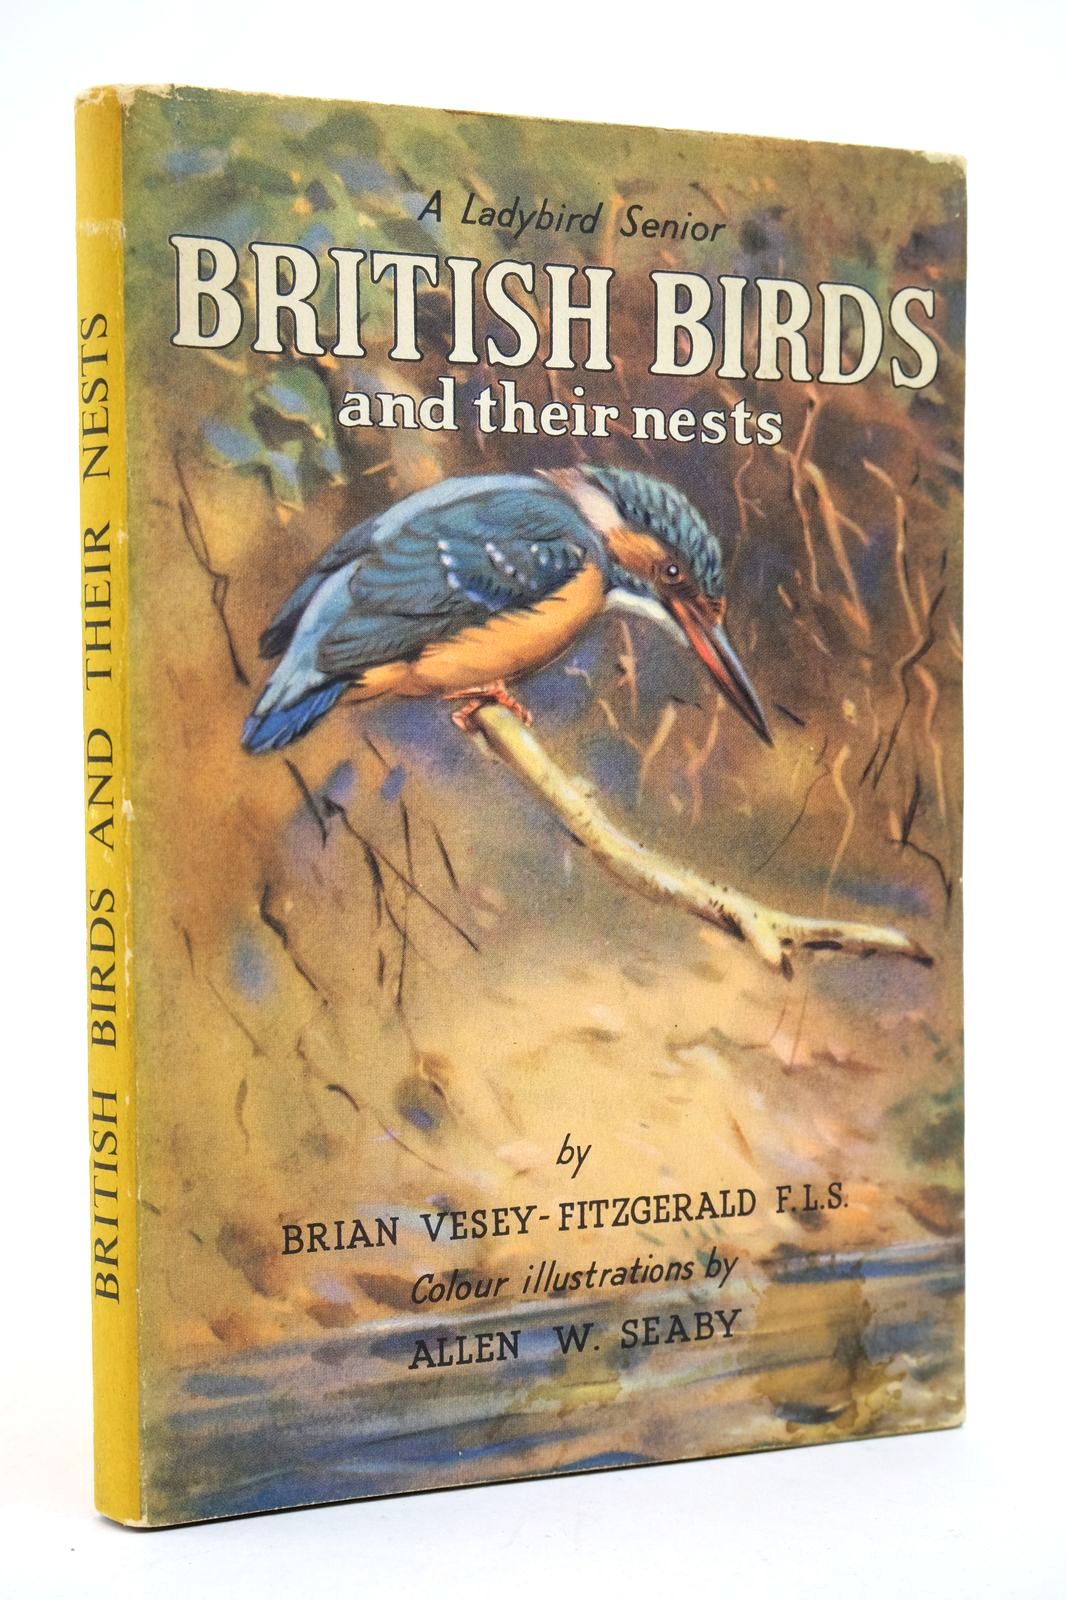 Photo of BRITISH BIRDS AND THEIR NESTS written by Vesey-Fitzgerald, Brian illustrated by Seaby, Allen W. published by Wills & Hepworth Ltd. (STOCK CODE: 2139706)  for sale by Stella & Rose's Books